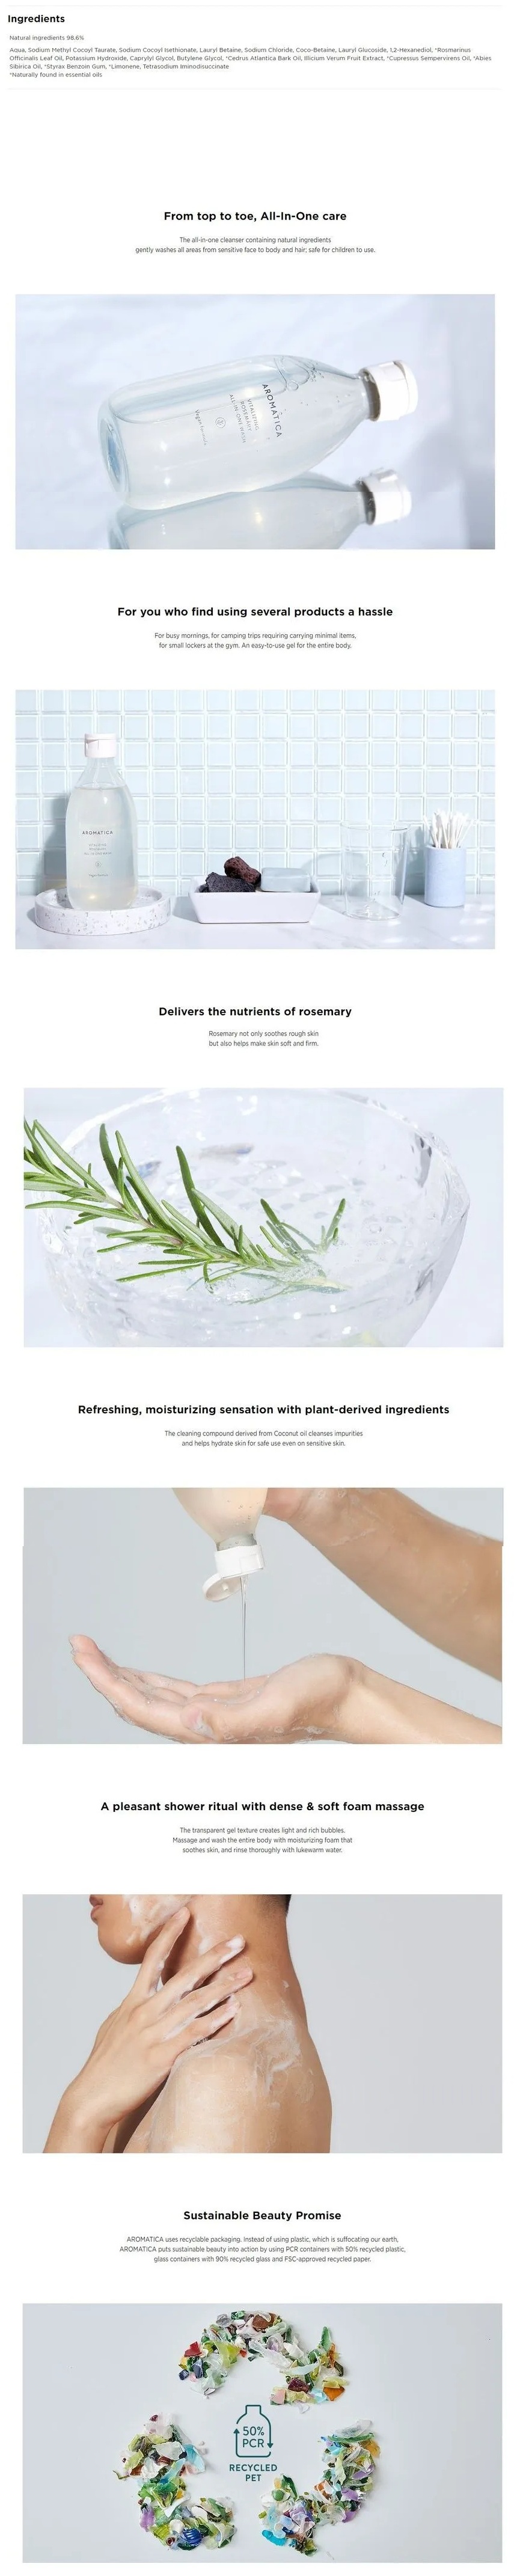 Aromatica Vitalizing Rosemary All in One Wash korean skincare product online shop malaysia China singapore0